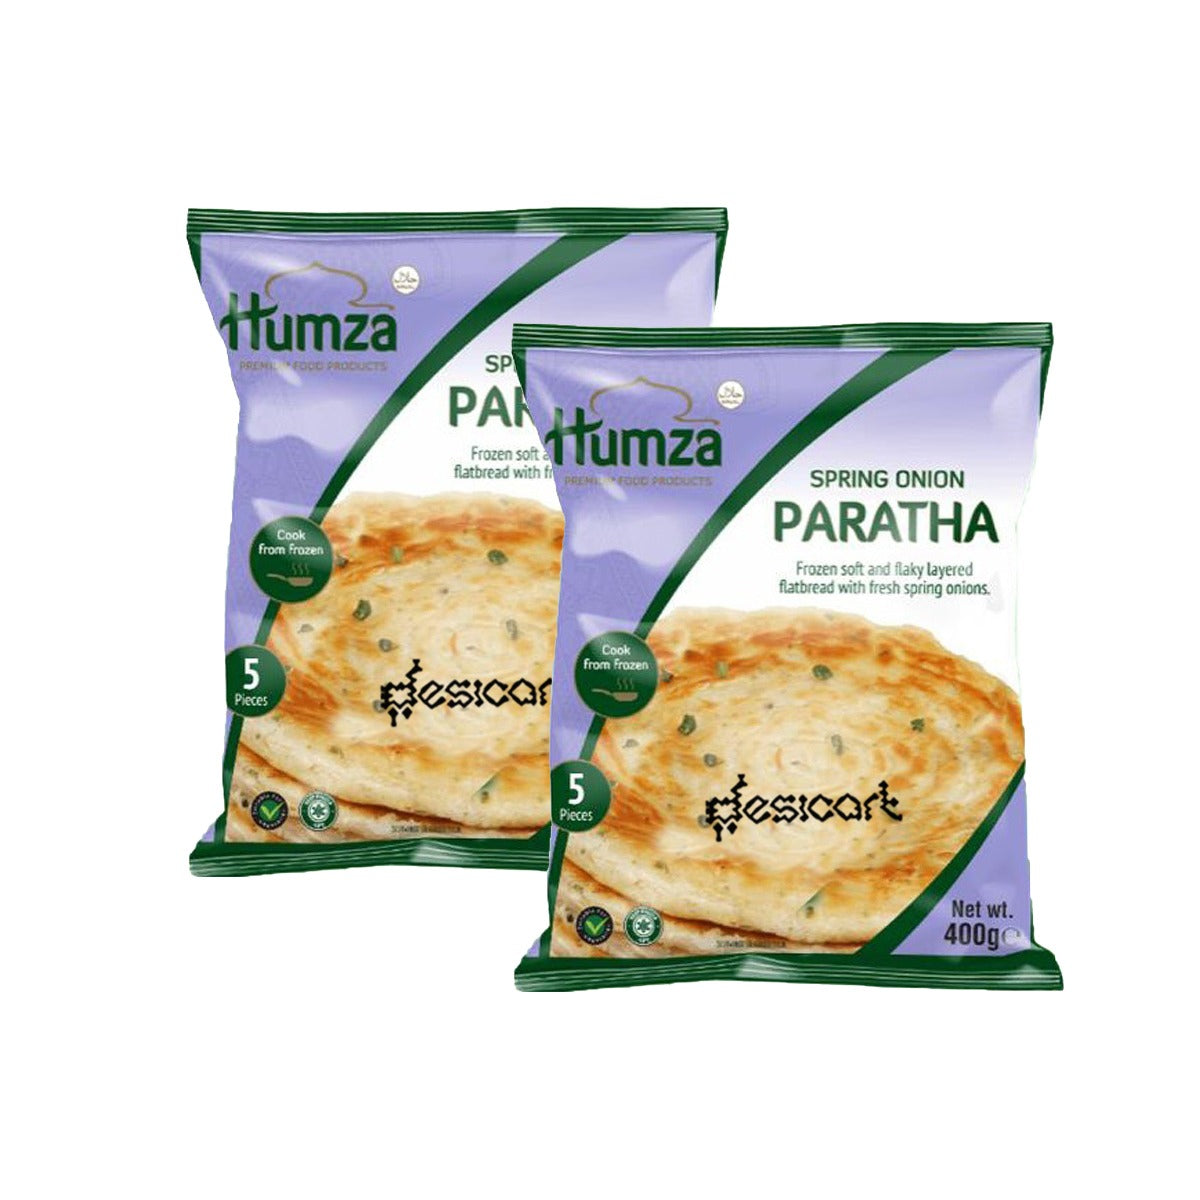 HUMZA SPRING ONION PARATHA 400G (PACK OF 2) 